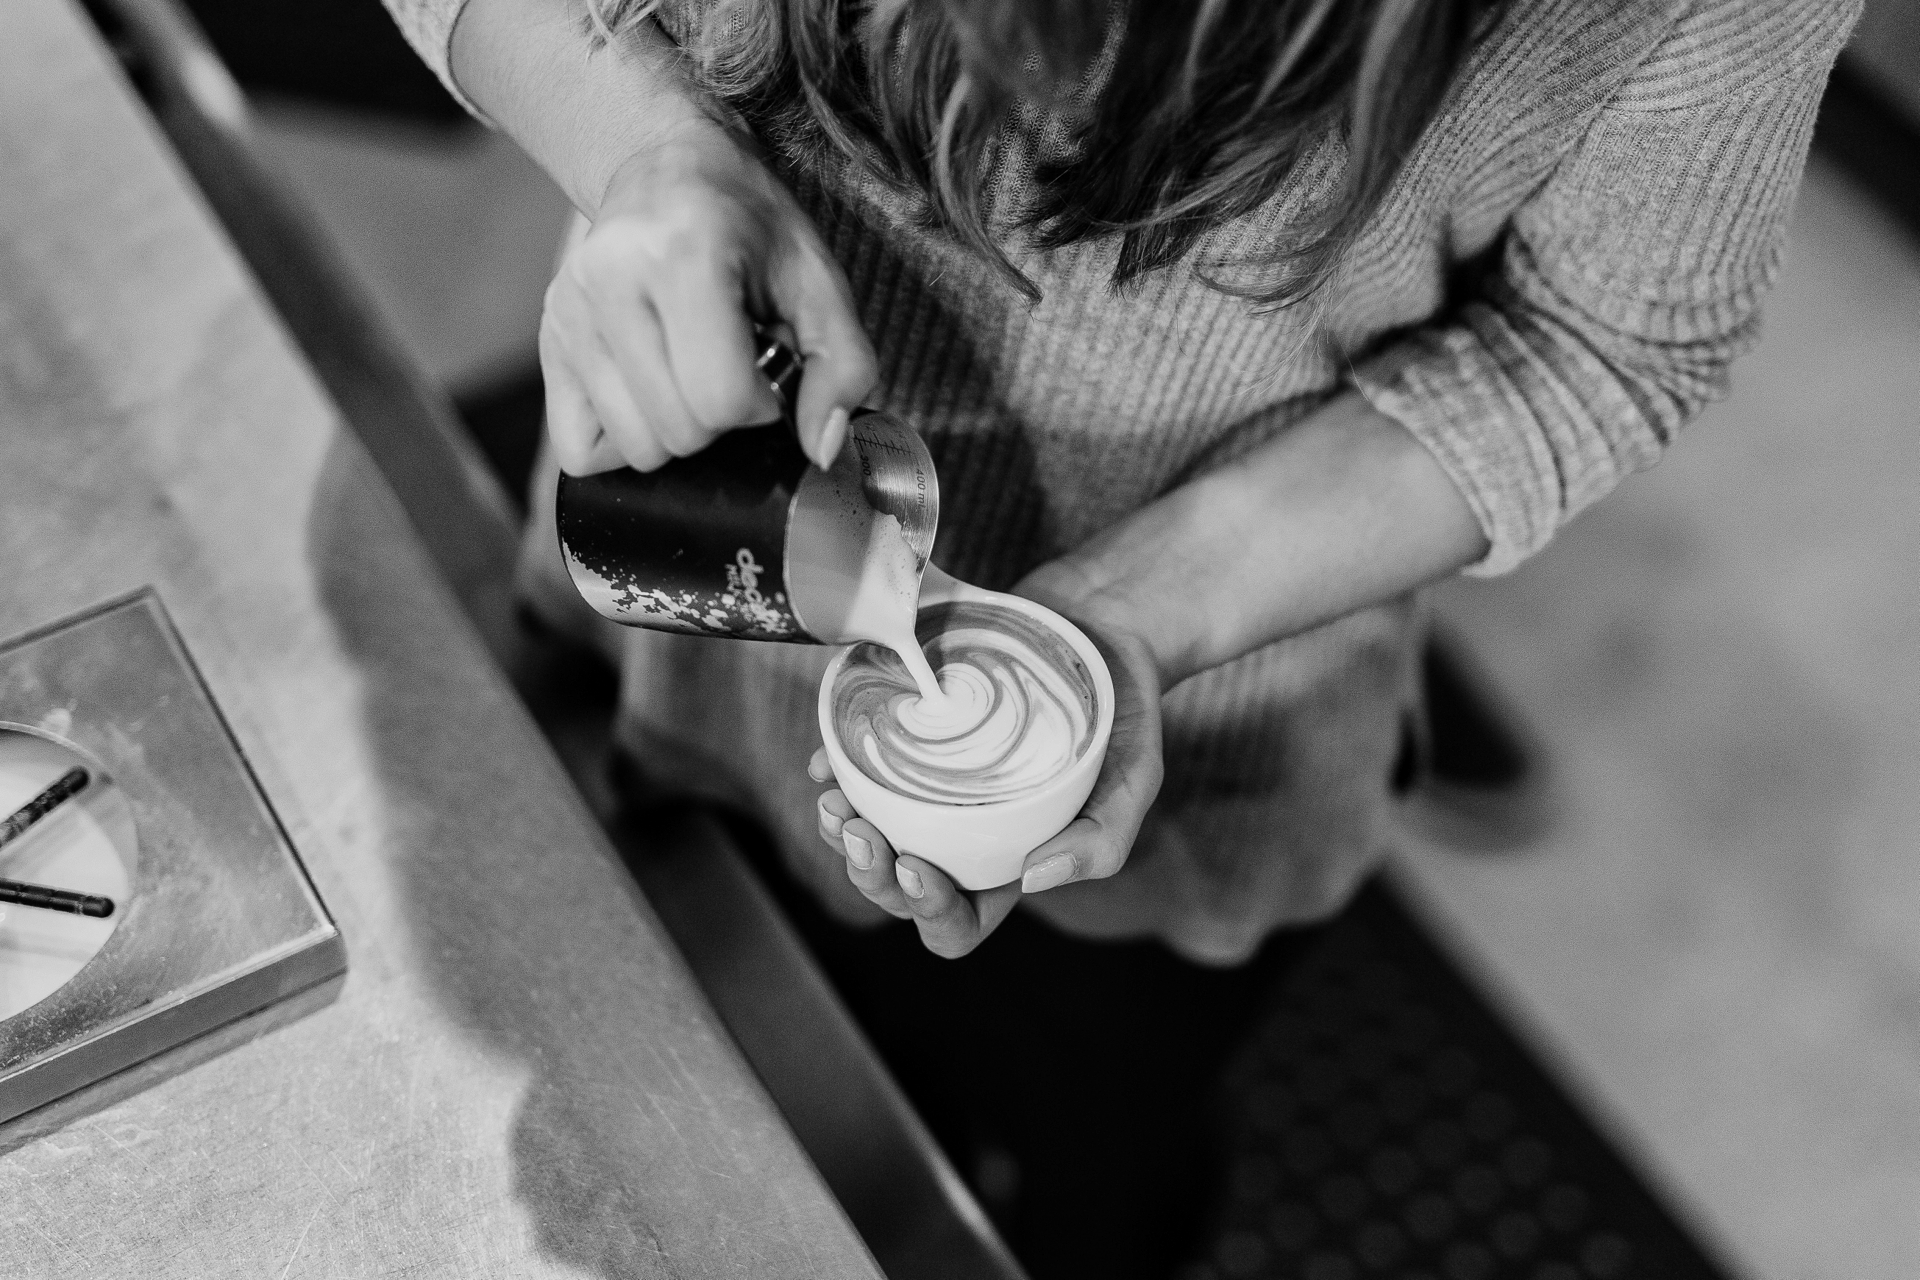 A barista pours a latte, seen from above